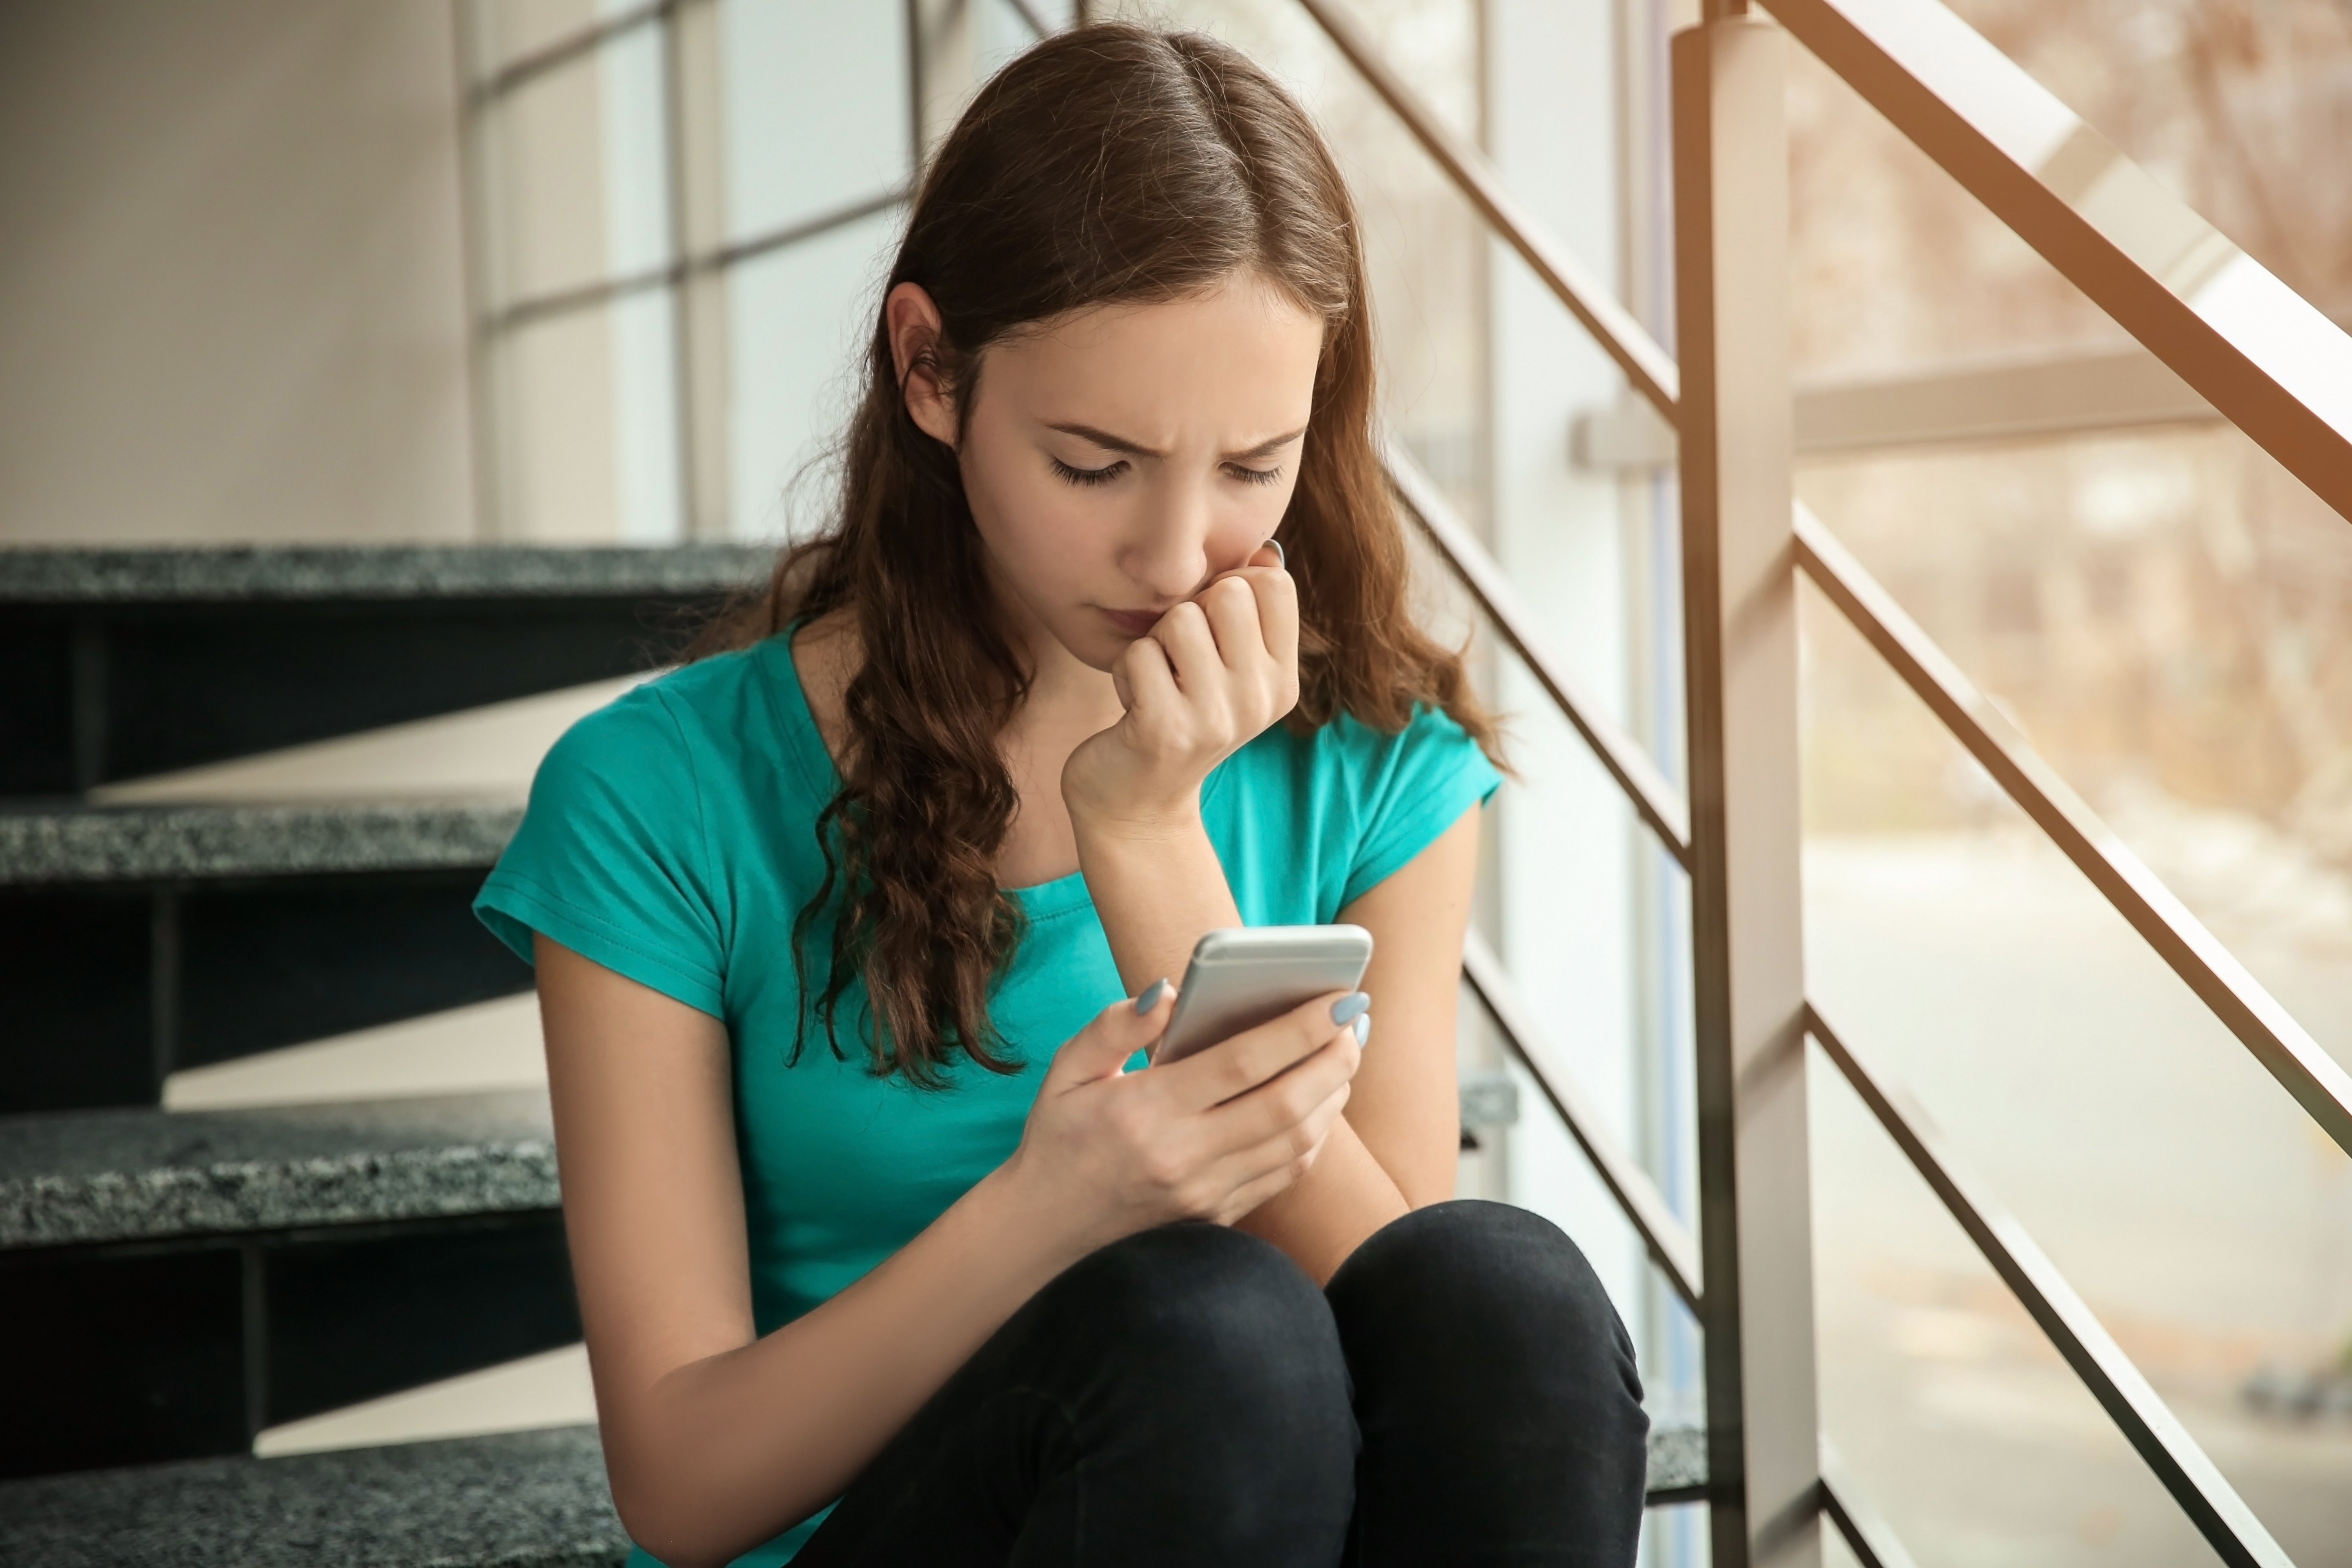 A teenage girl catching up with friends online. | Photo: Shutterstock